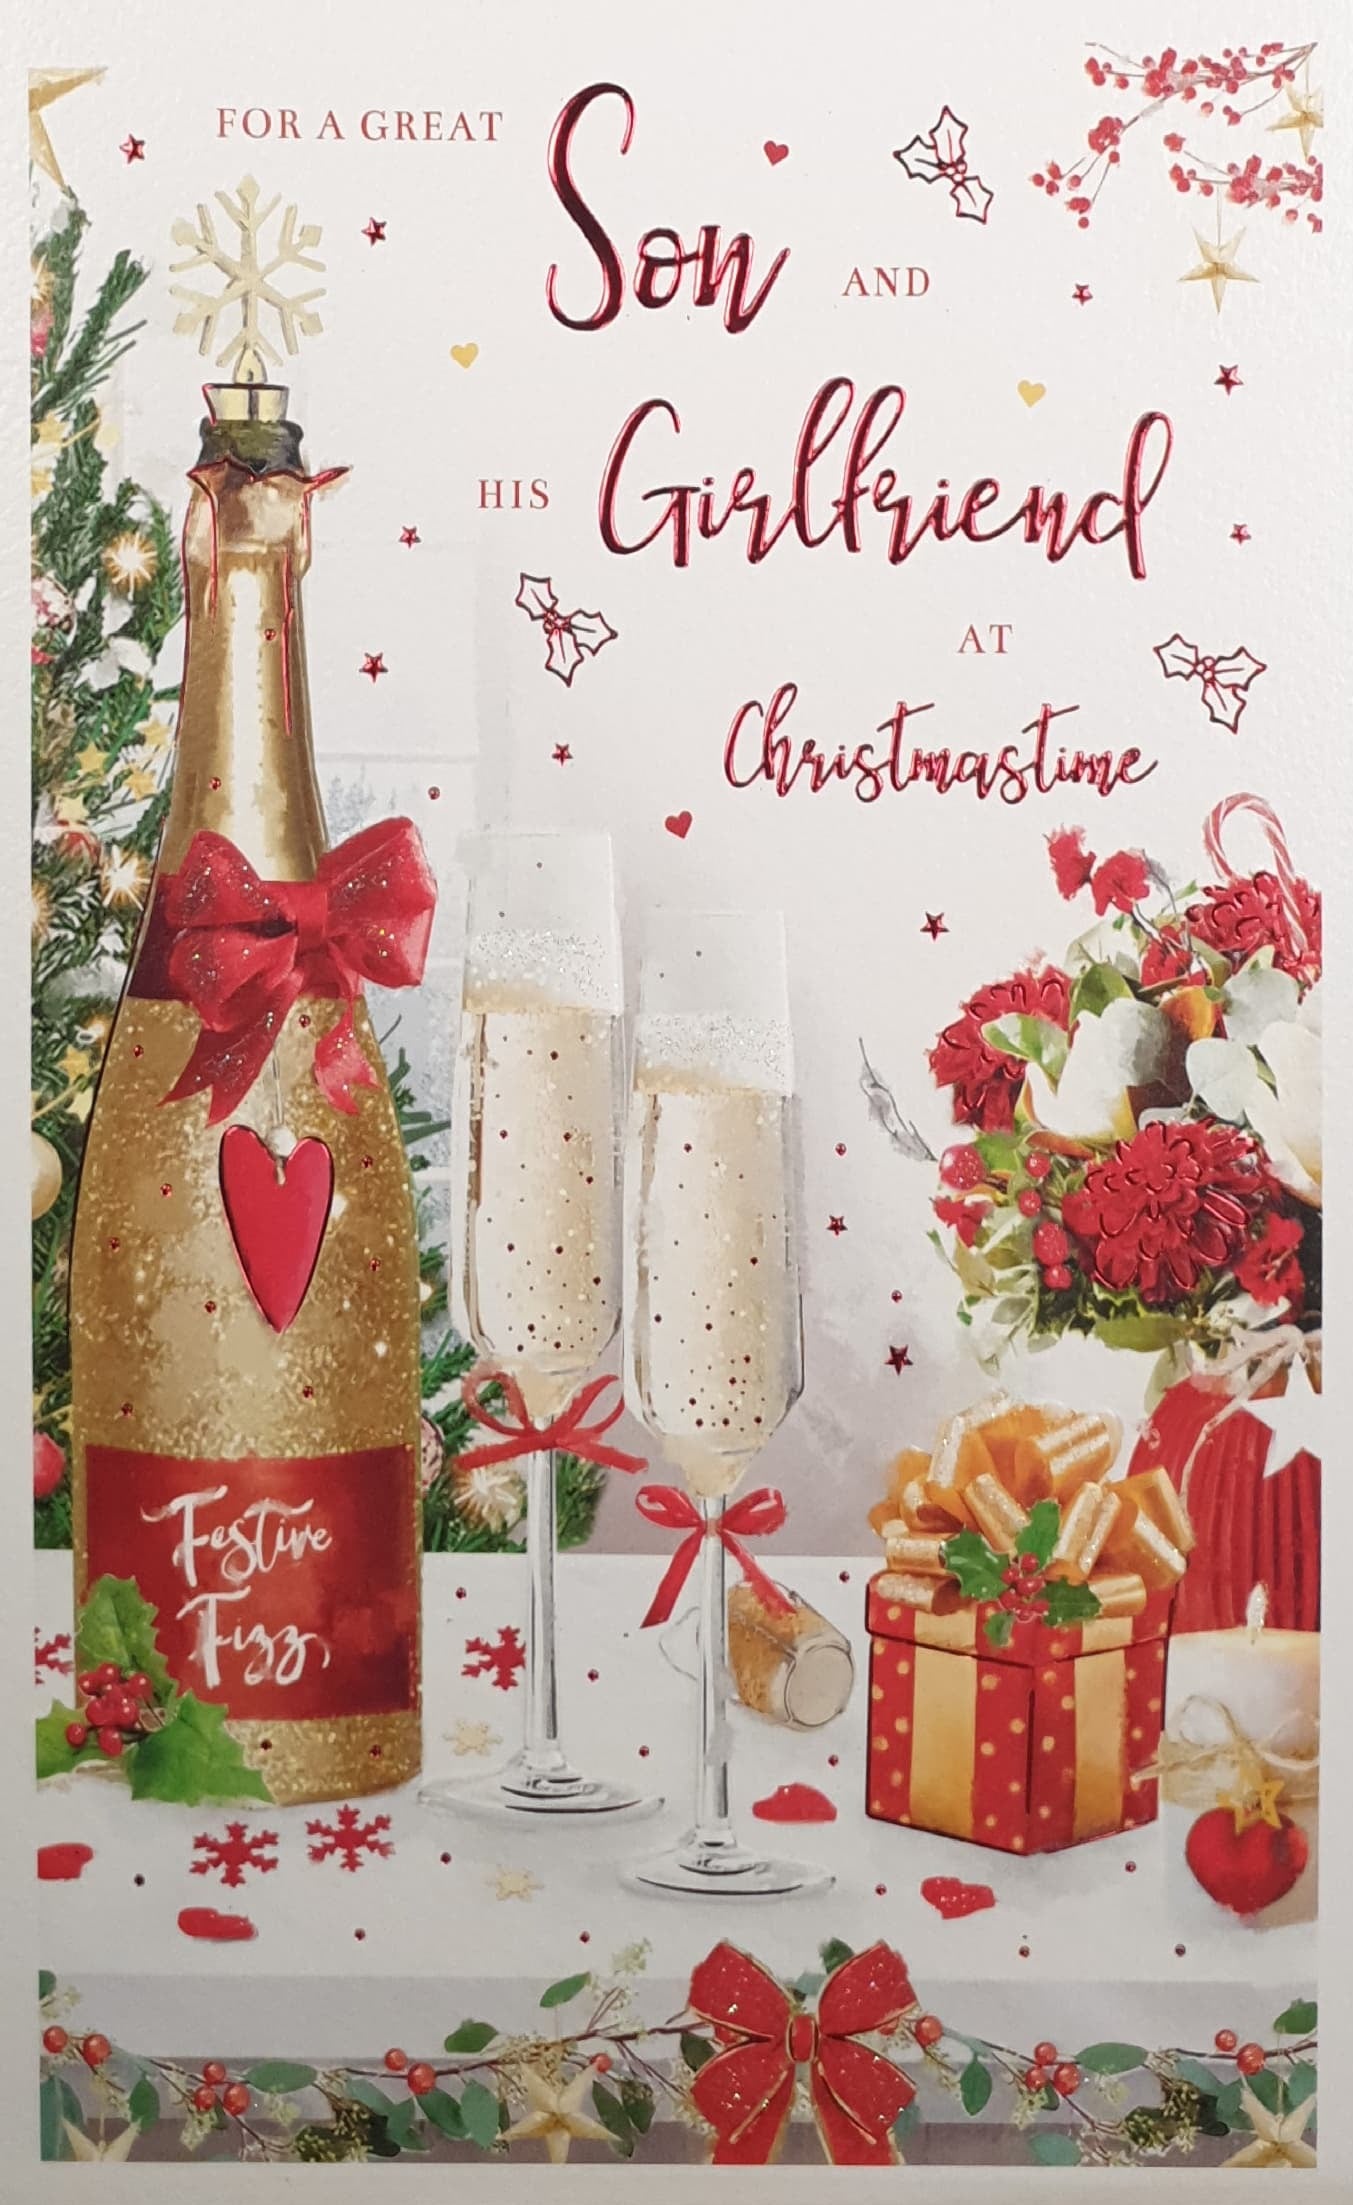 Son & His Girlfriend Christmas Card - Champagne & Decorations on Table